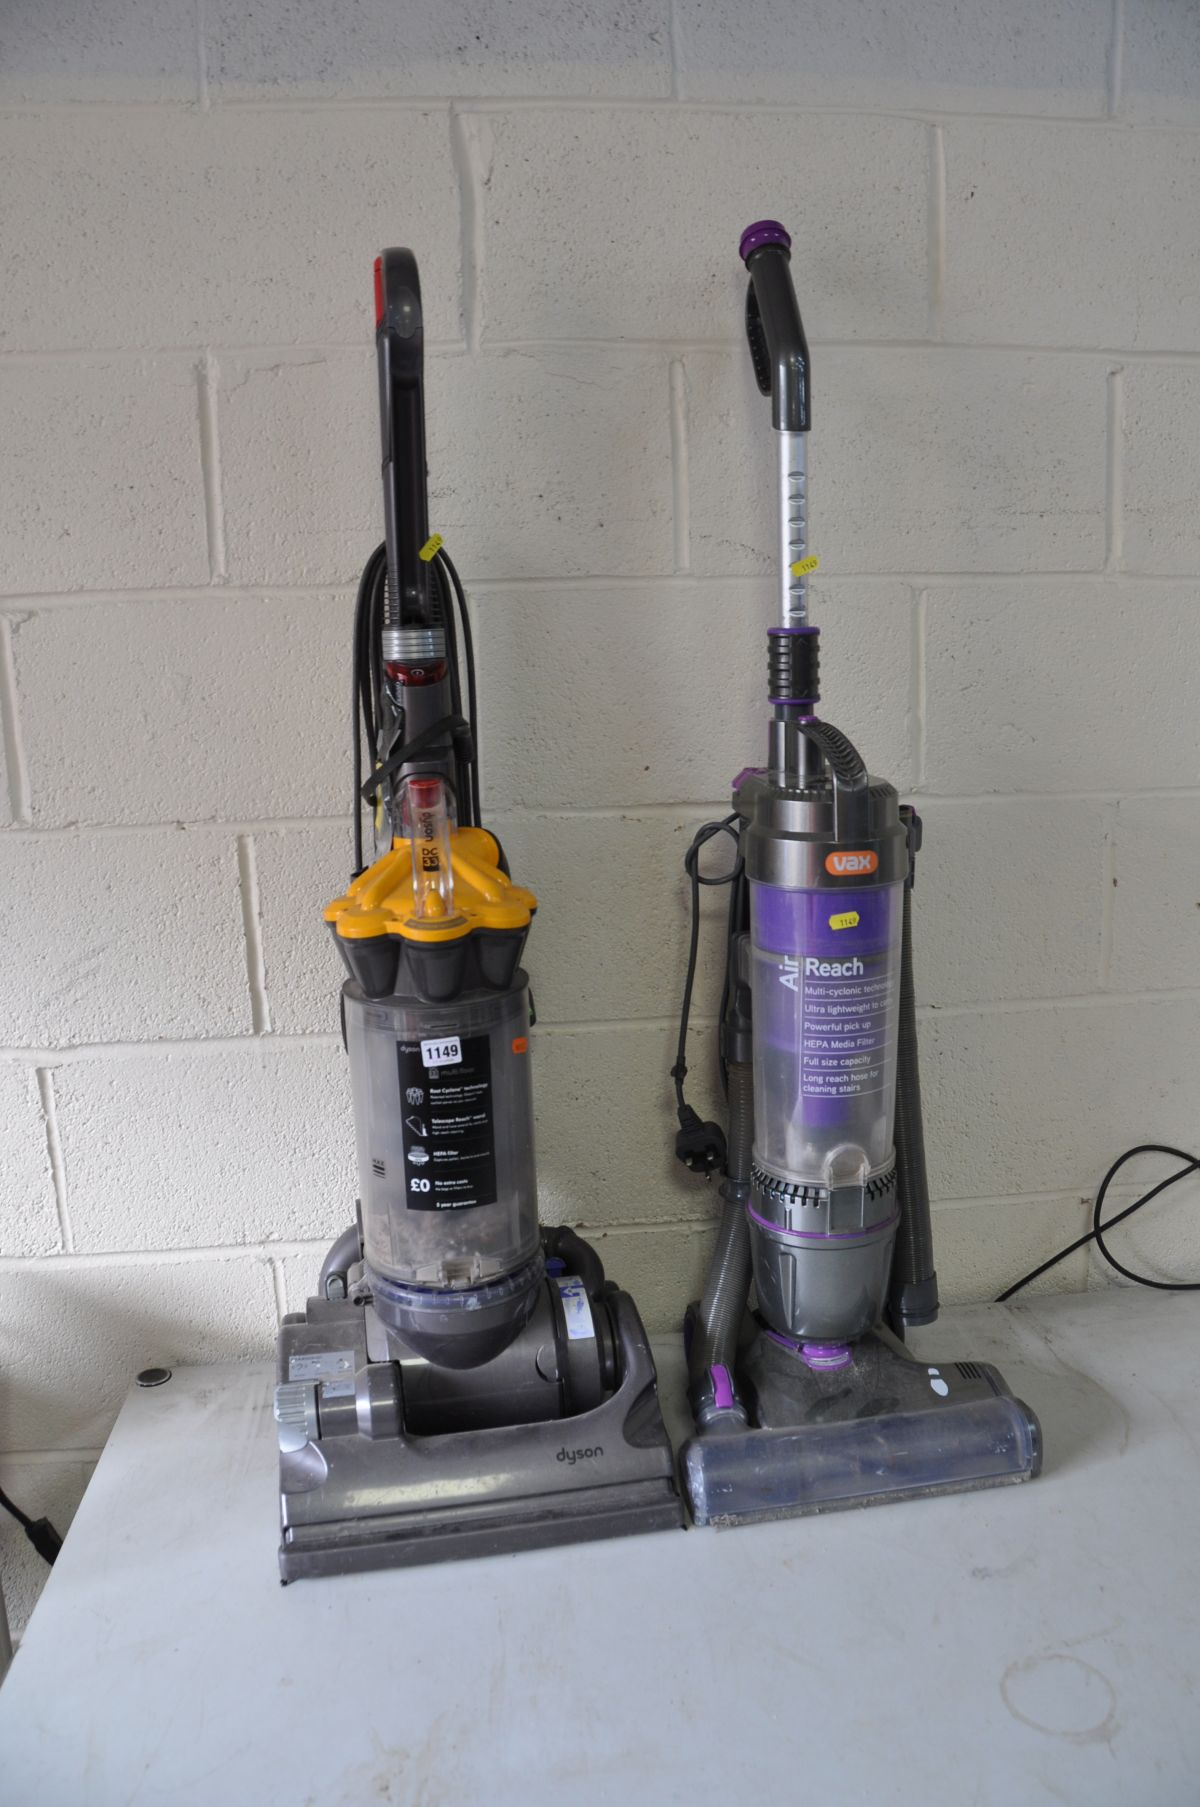 A DYSON DC33 VACUUM CLEANER with two spare belts and a Vax Air Reach Vacuum cleaner (both PAT pass